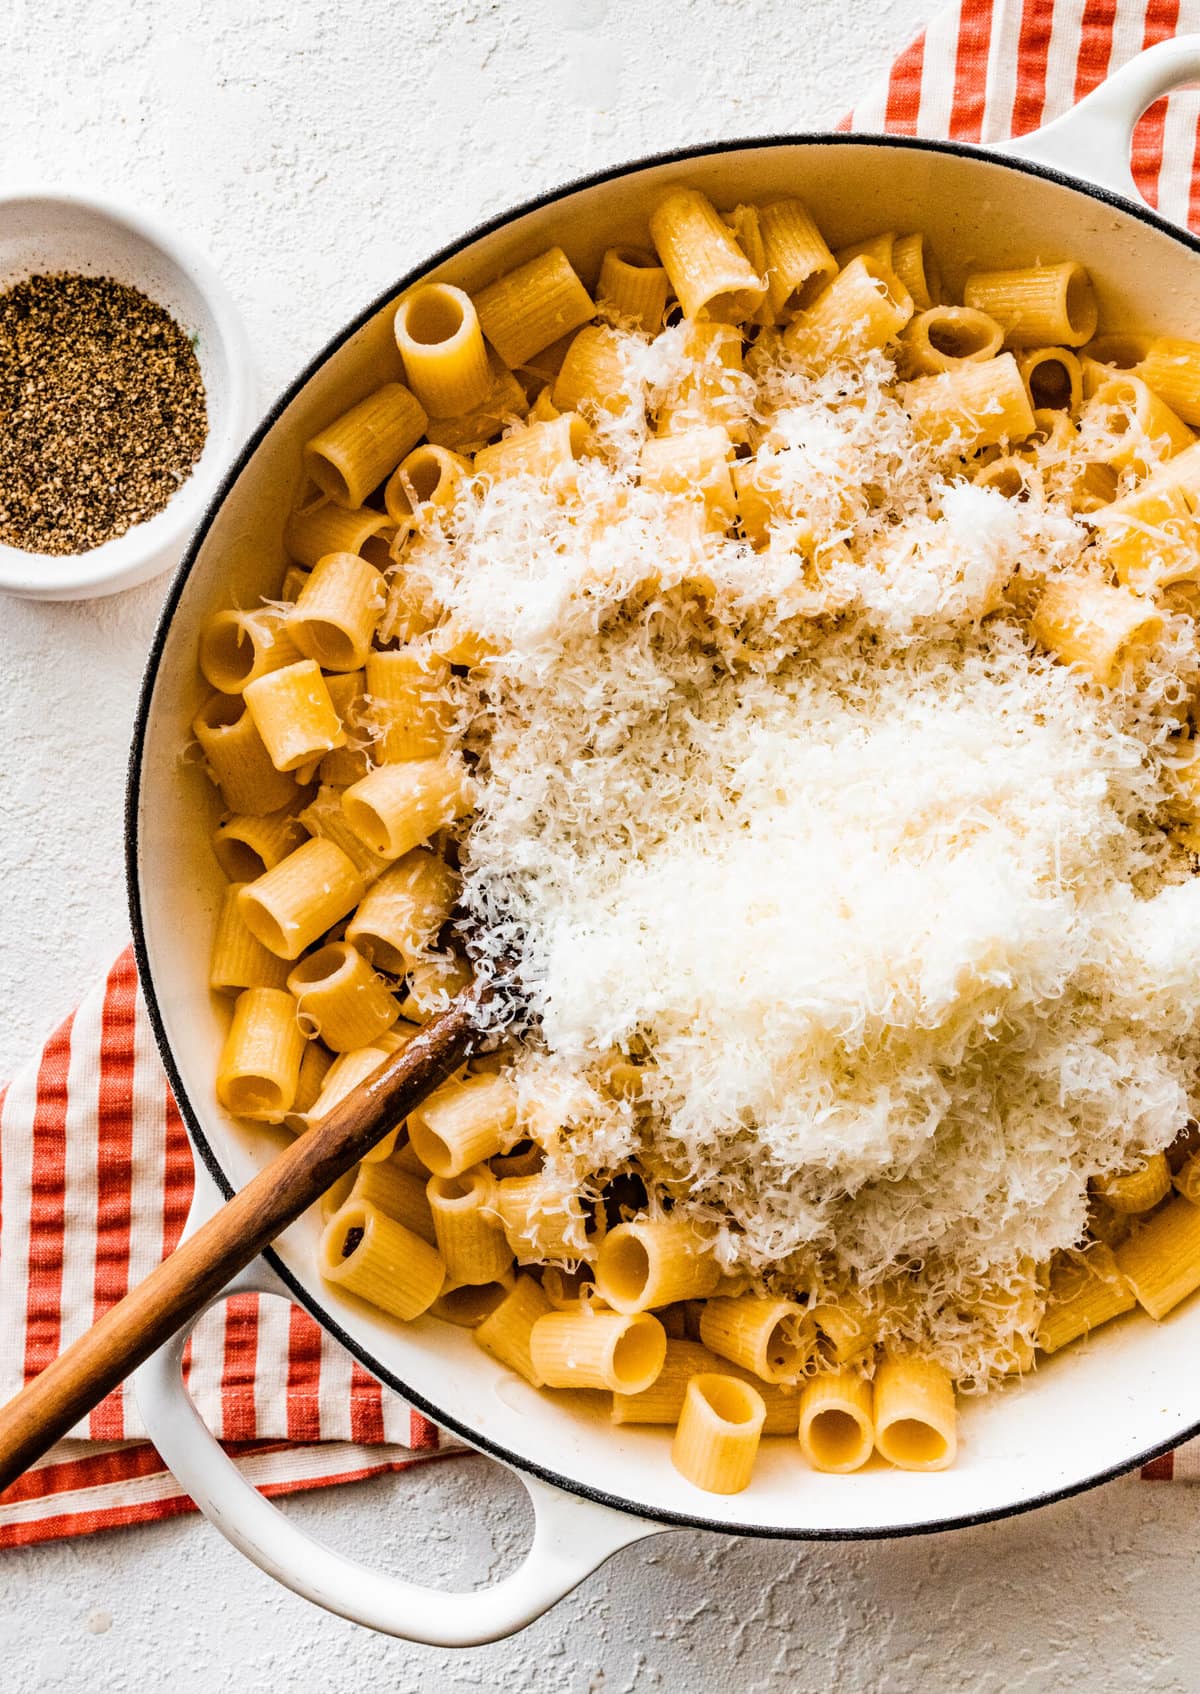 How to make authentic pasta alla gricia step-by-step: add cheese to the pasta.